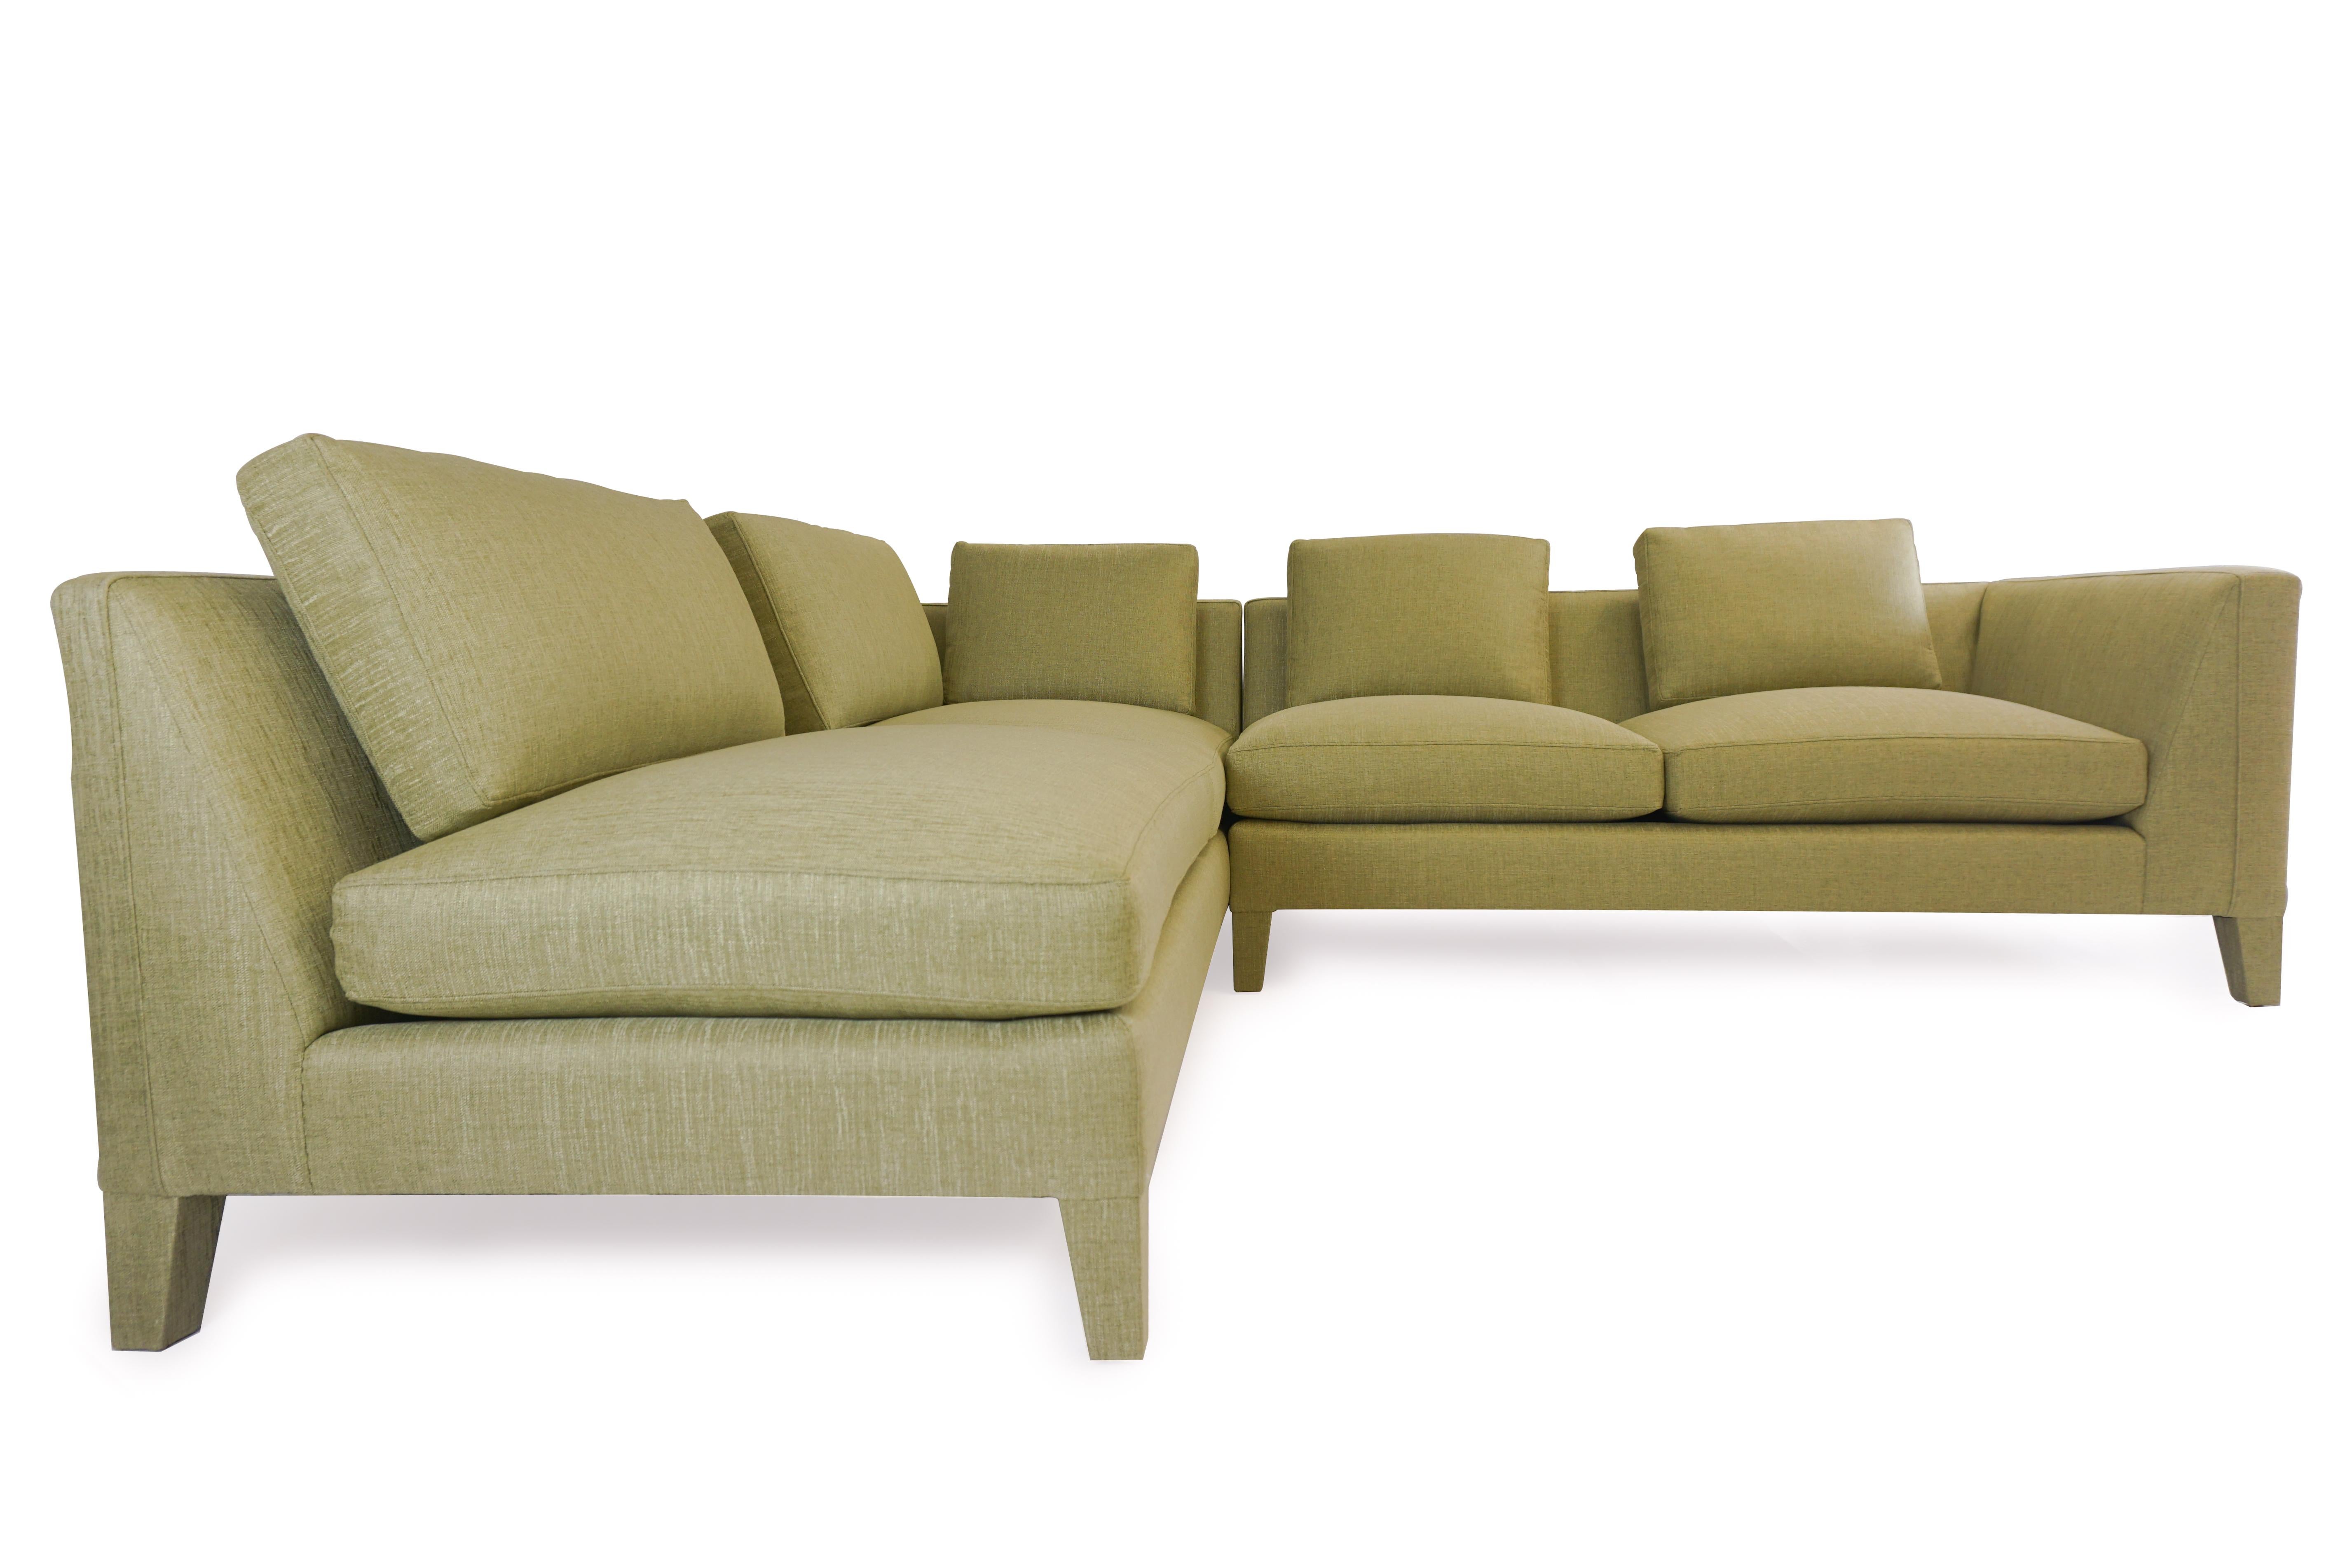 Modern Loose Cushion Sectional Sofa with Upholstered Legs In New Condition For Sale In Greenwich, CT